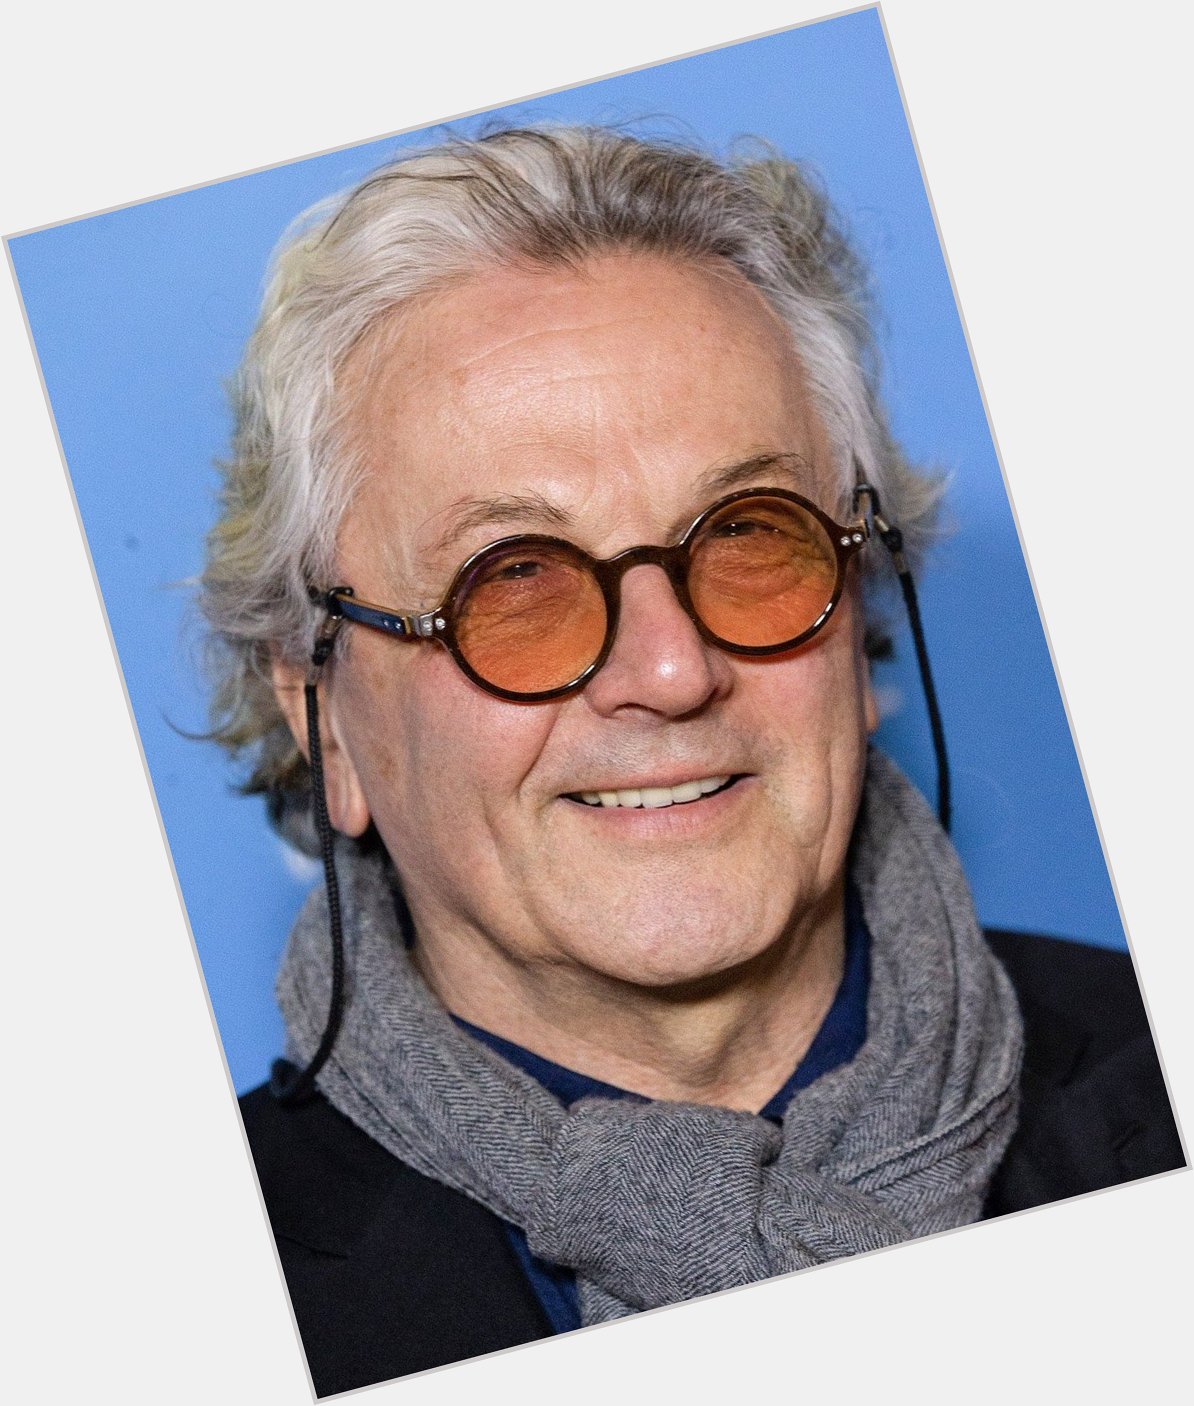 Happy 78th birthday to George Miller, the creator and director of the Mad Max franchise. 